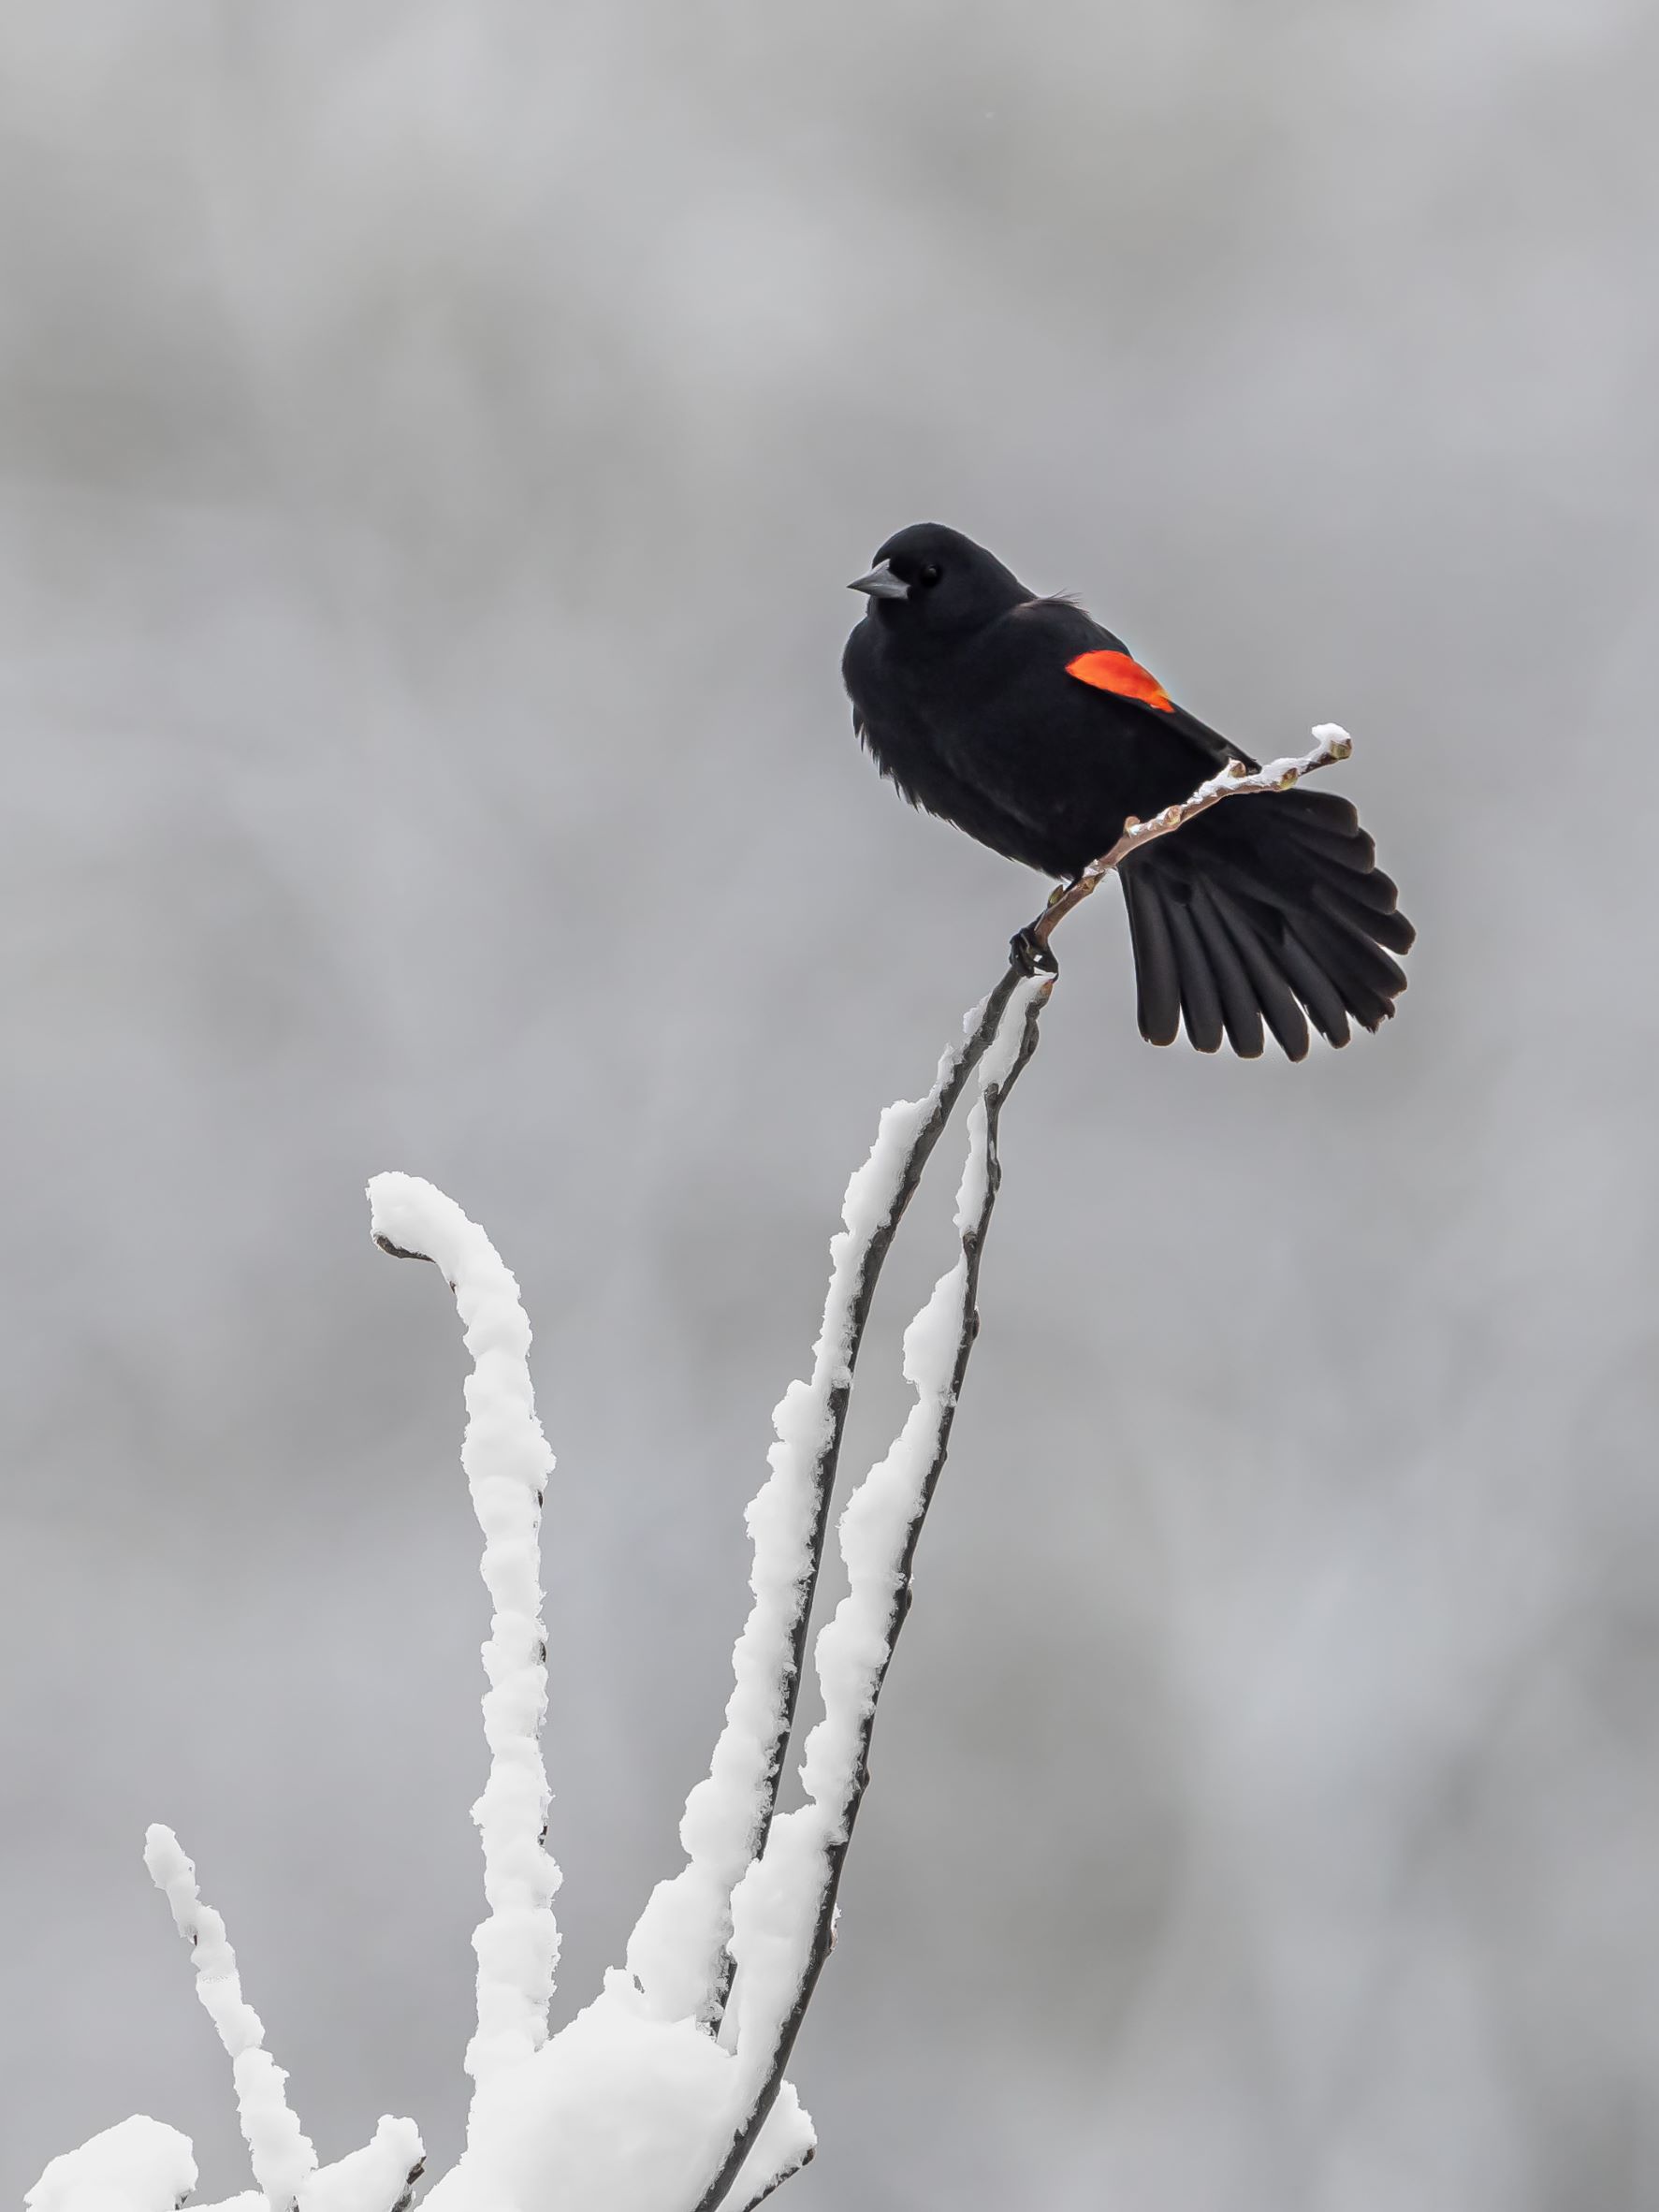 A male Redwing Blackbird in the snow